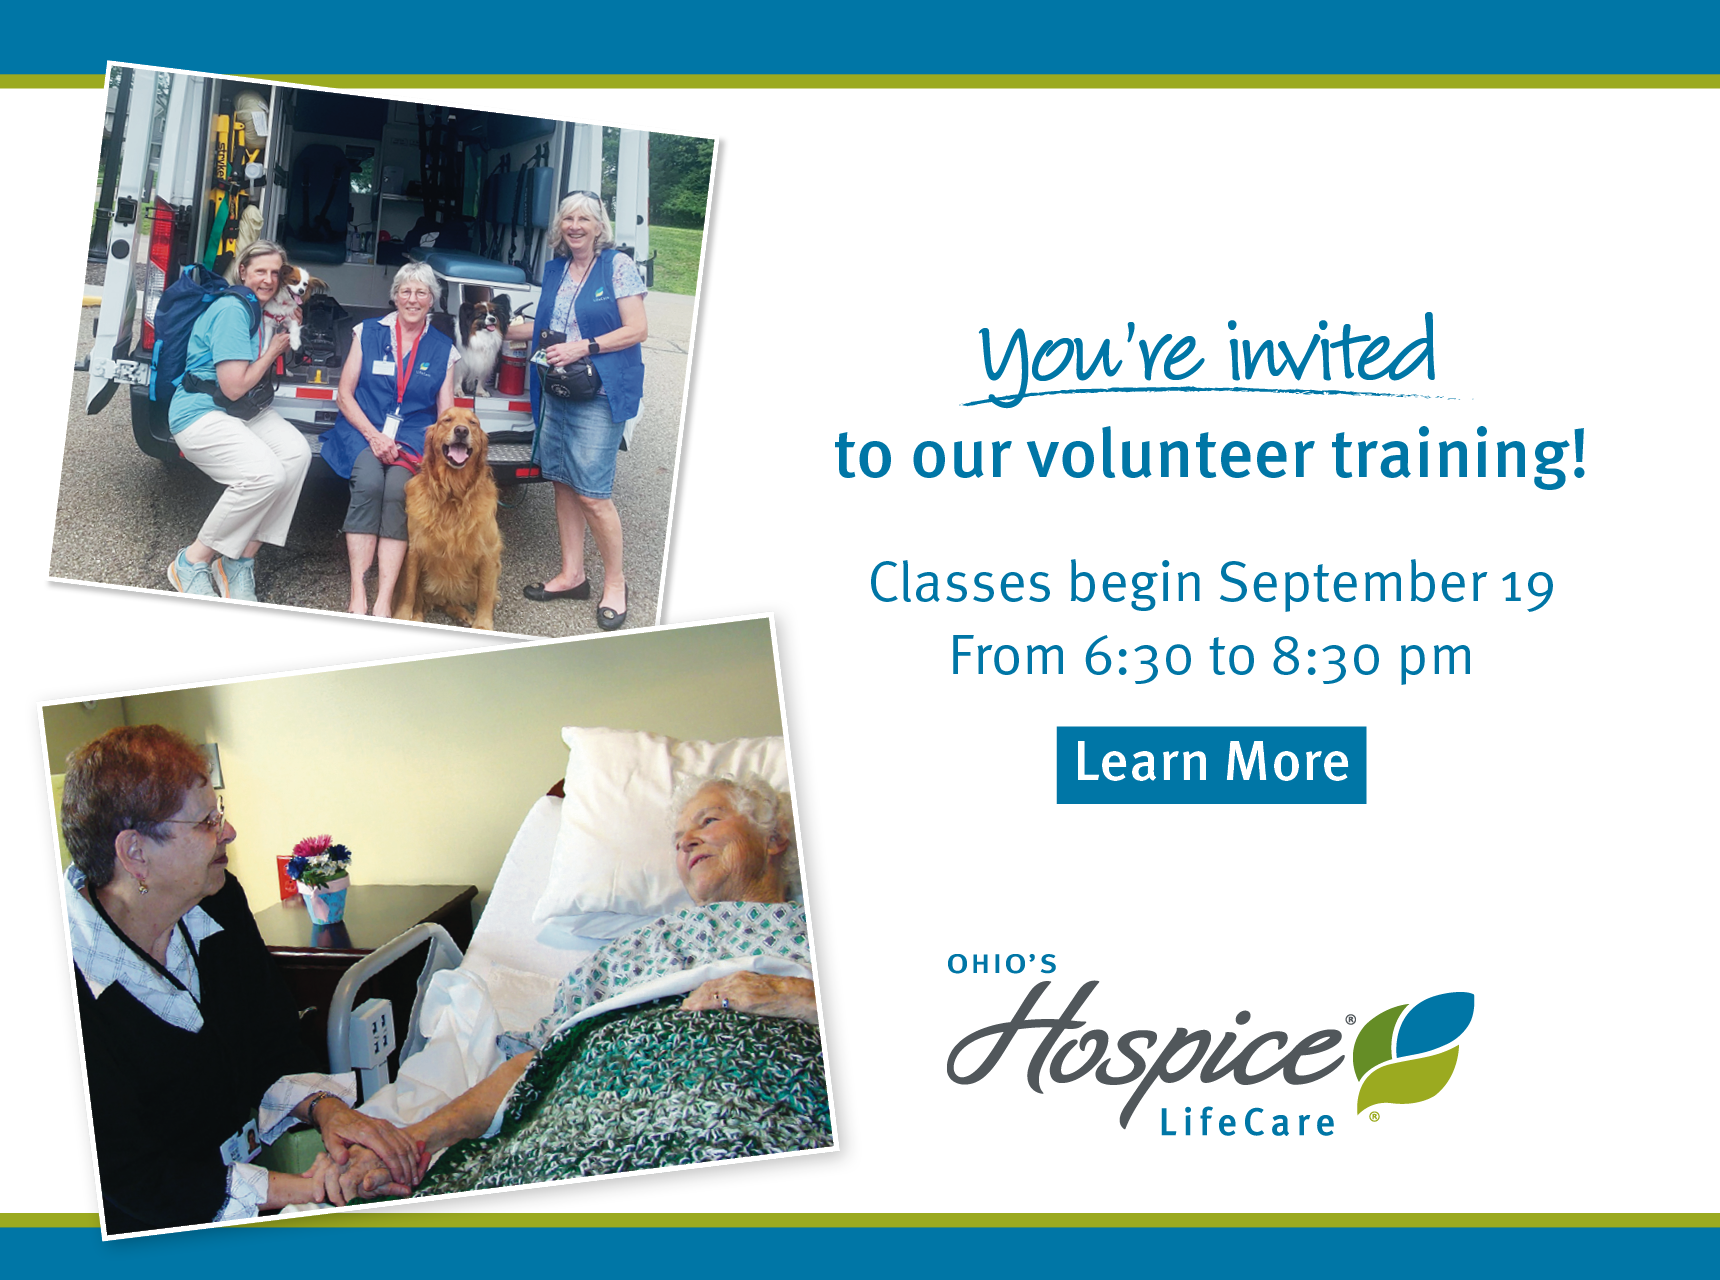 You're invtied to our volunteer training! Classes begin September 19.